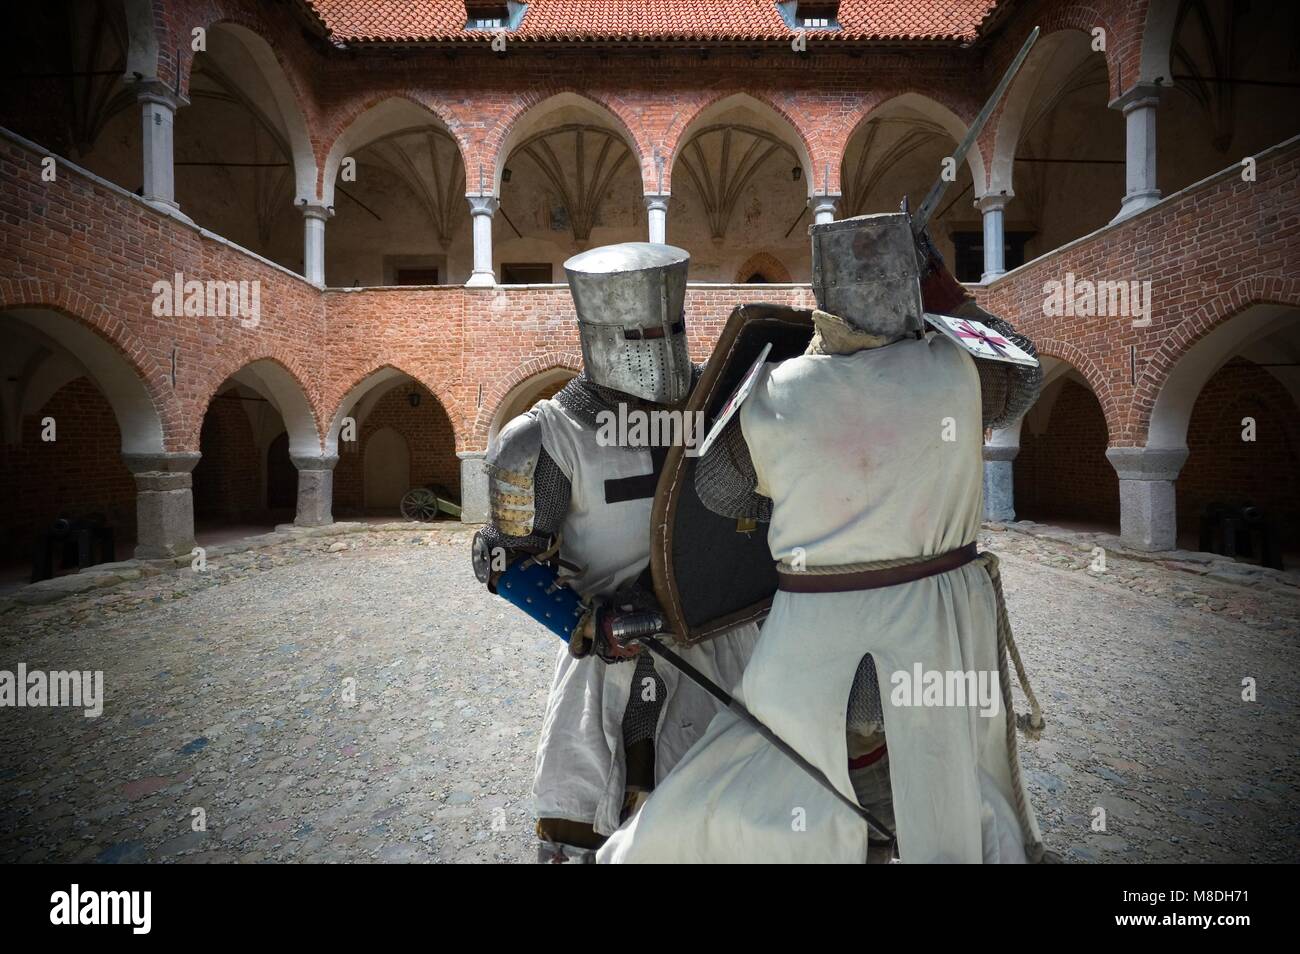 Armored fighting Teutonic knights on courtyard of Gothic medieval castle in Lidzbark Warminski, Poland Stock Photo